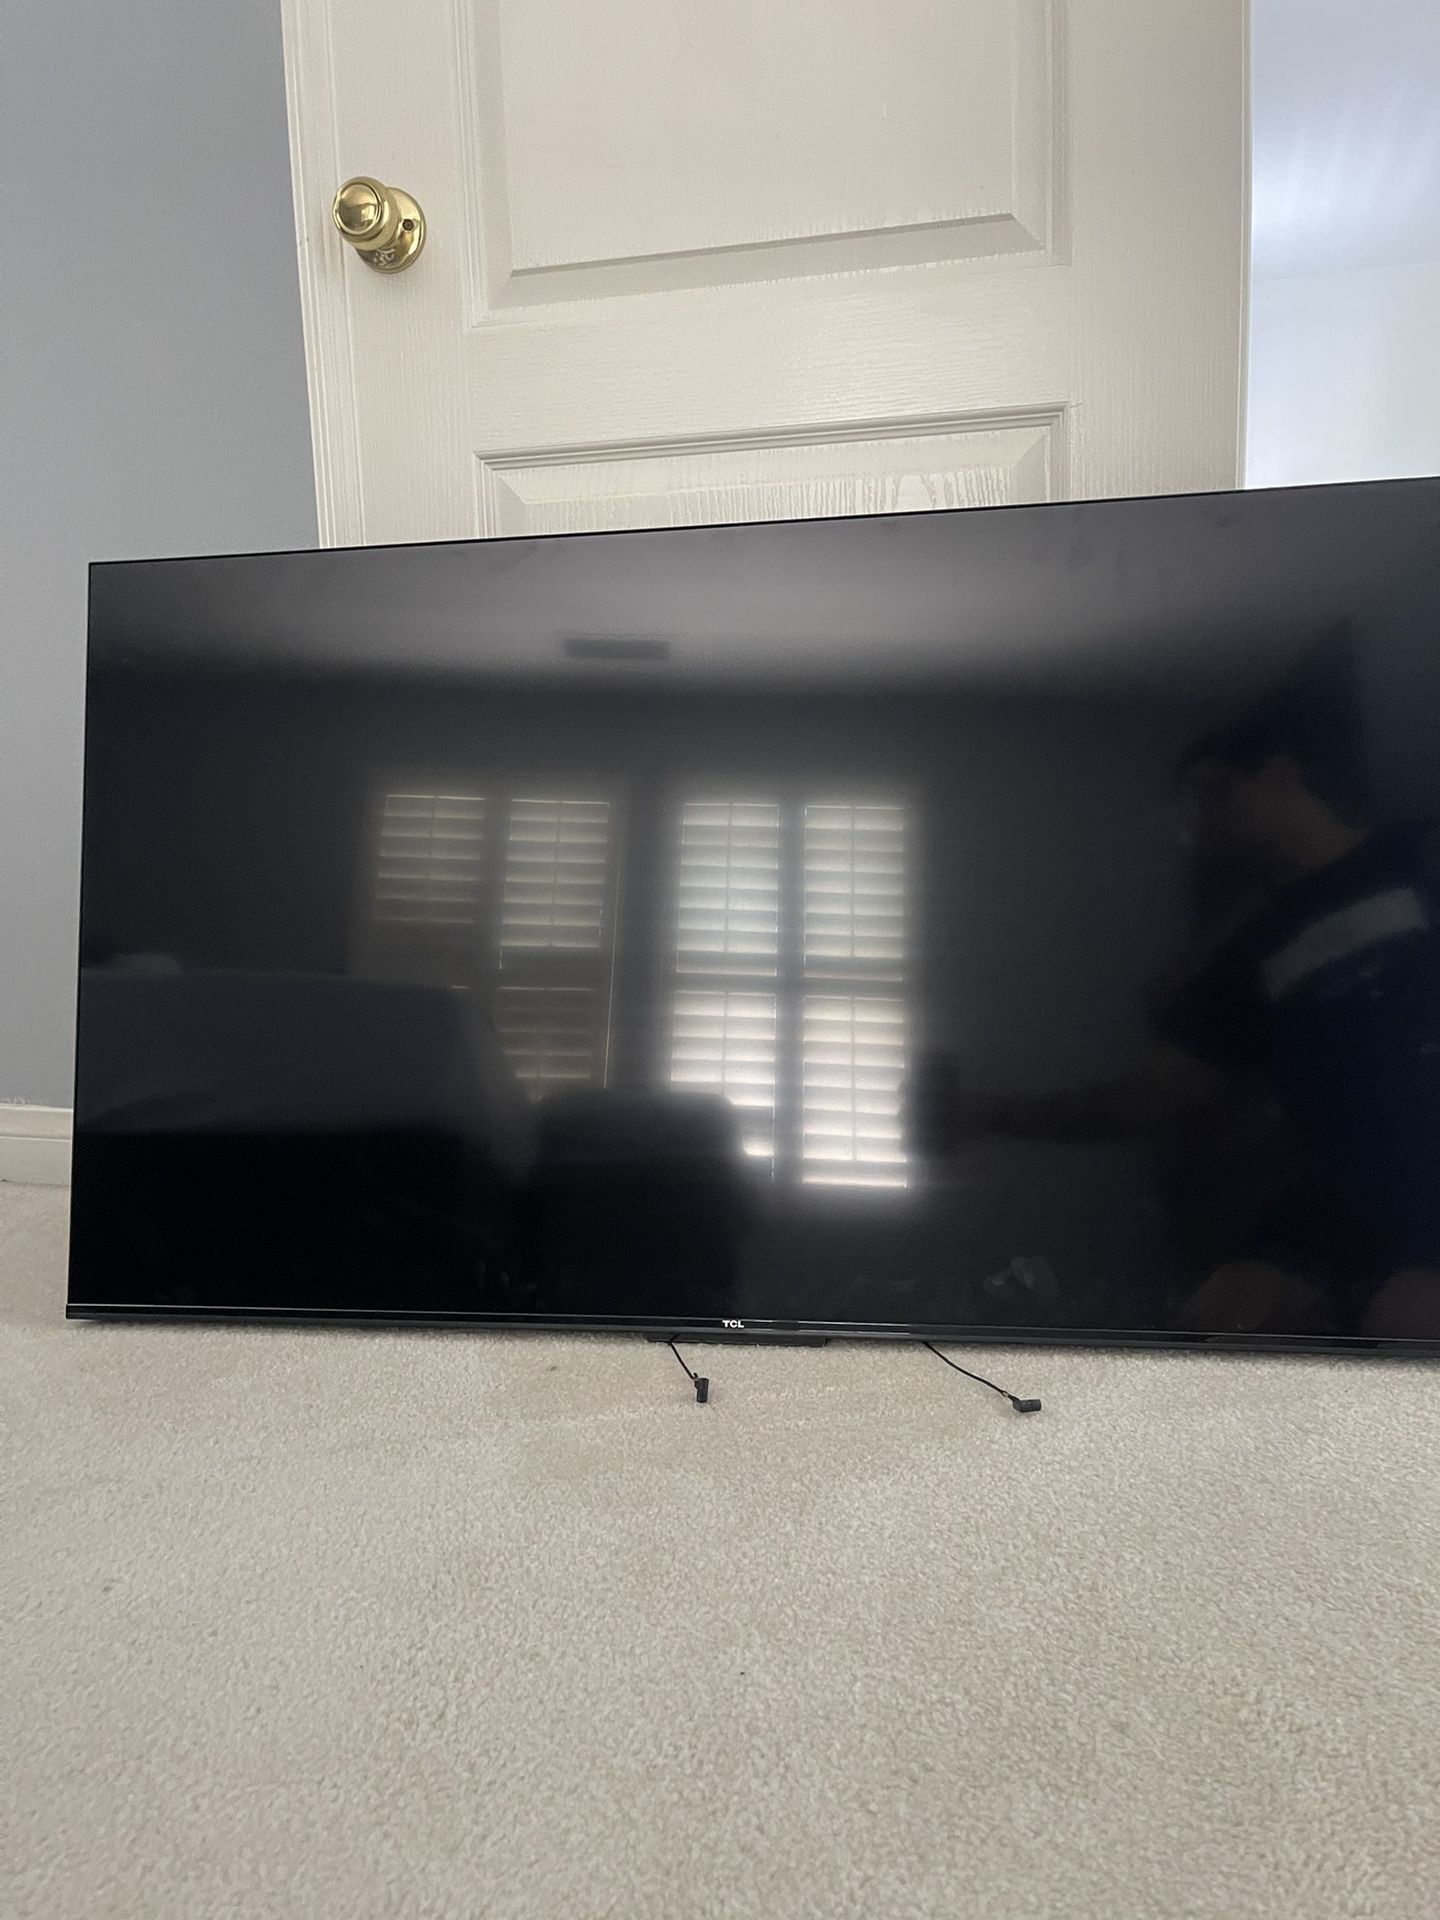 TCL 50" LED TV with Wall Mount - Used